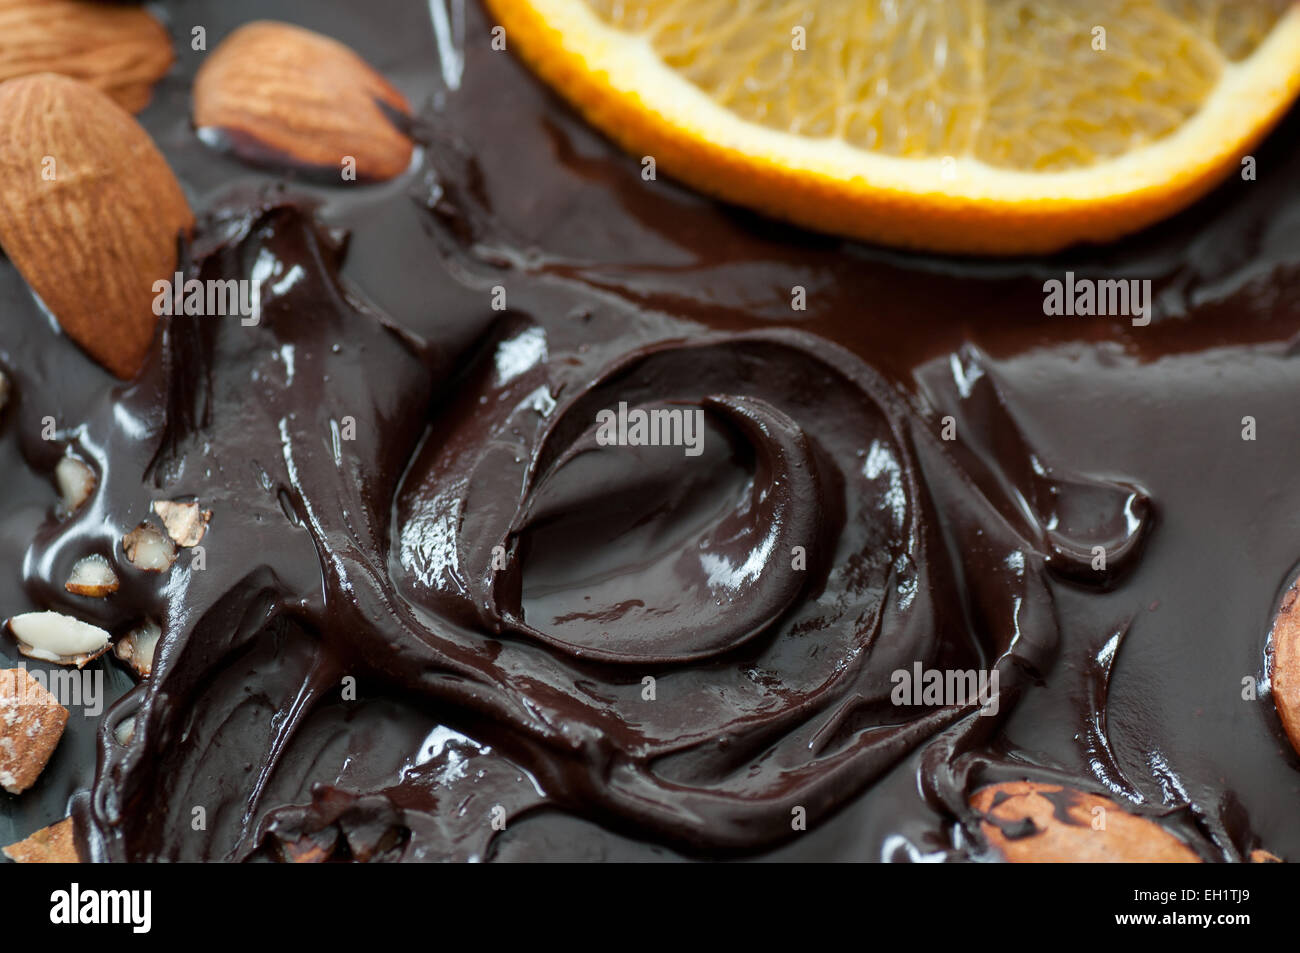 Melted chocolate with almonds and orange. Stock Photo